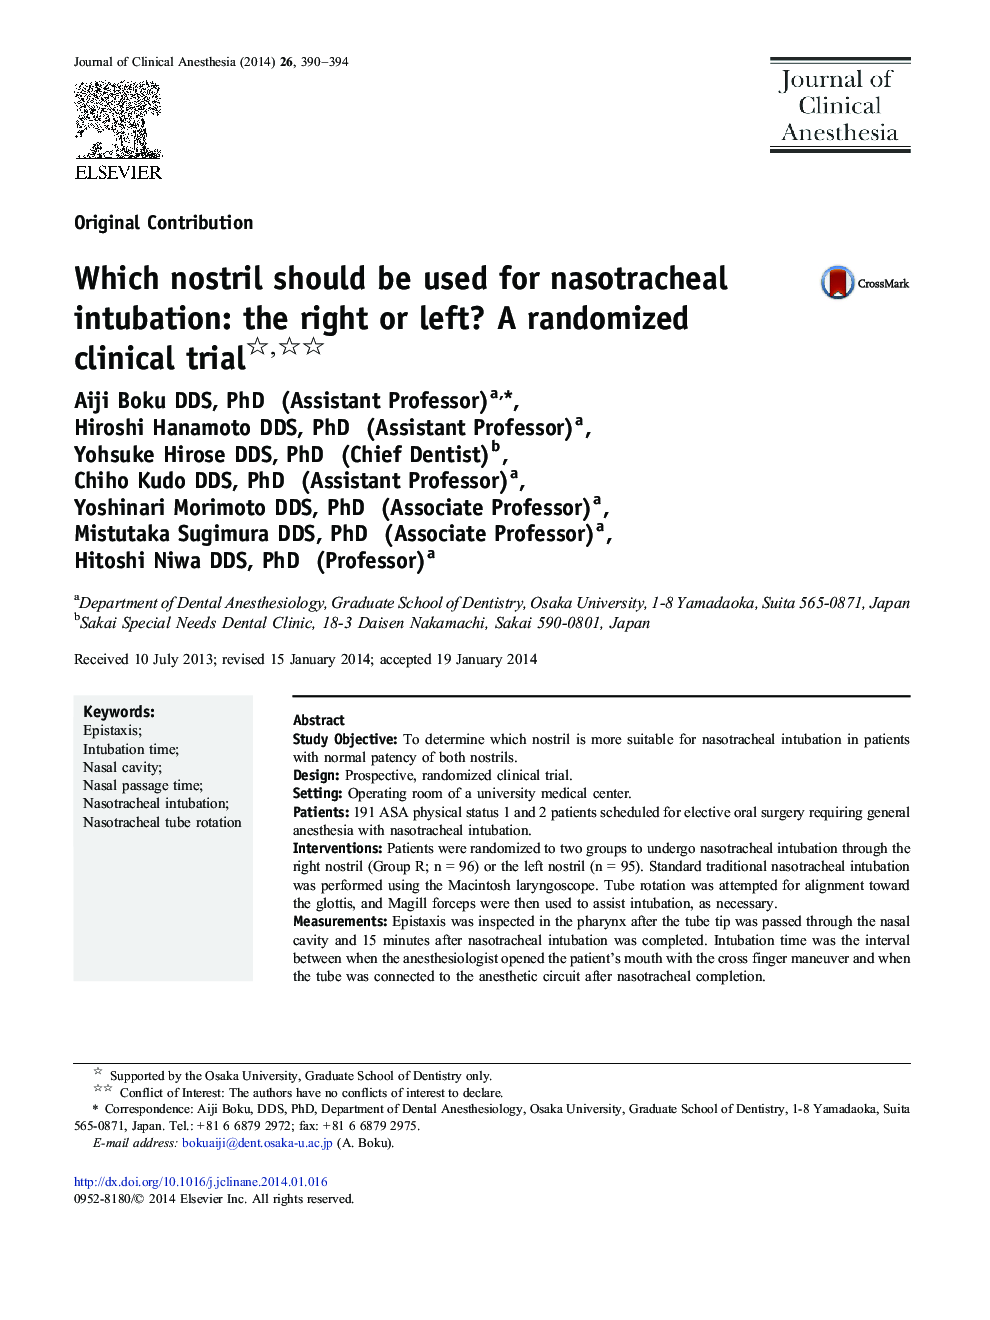 Which nostril should be used for nasotracheal intubation: the right or left? A randomized clinical trial 